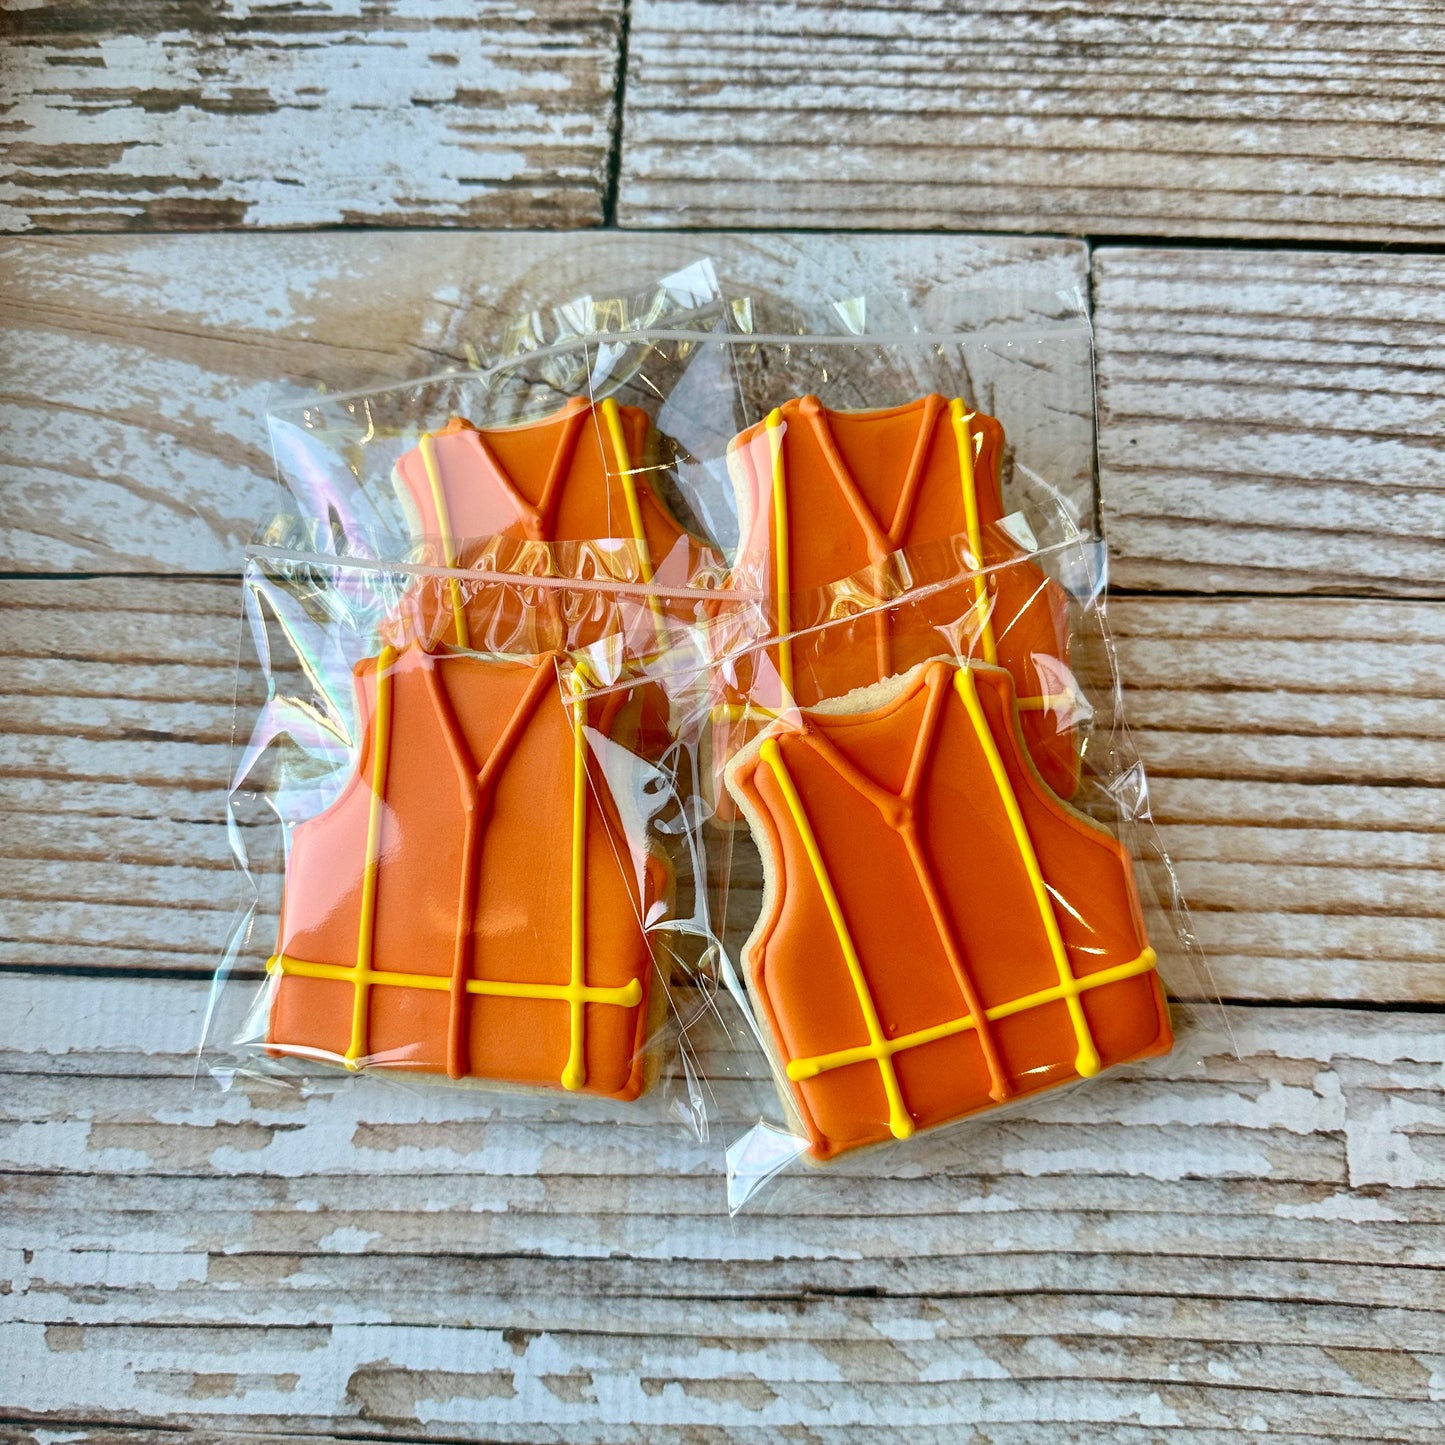 Construction Vests for Construction Themed Birthday Cookies--12 Count